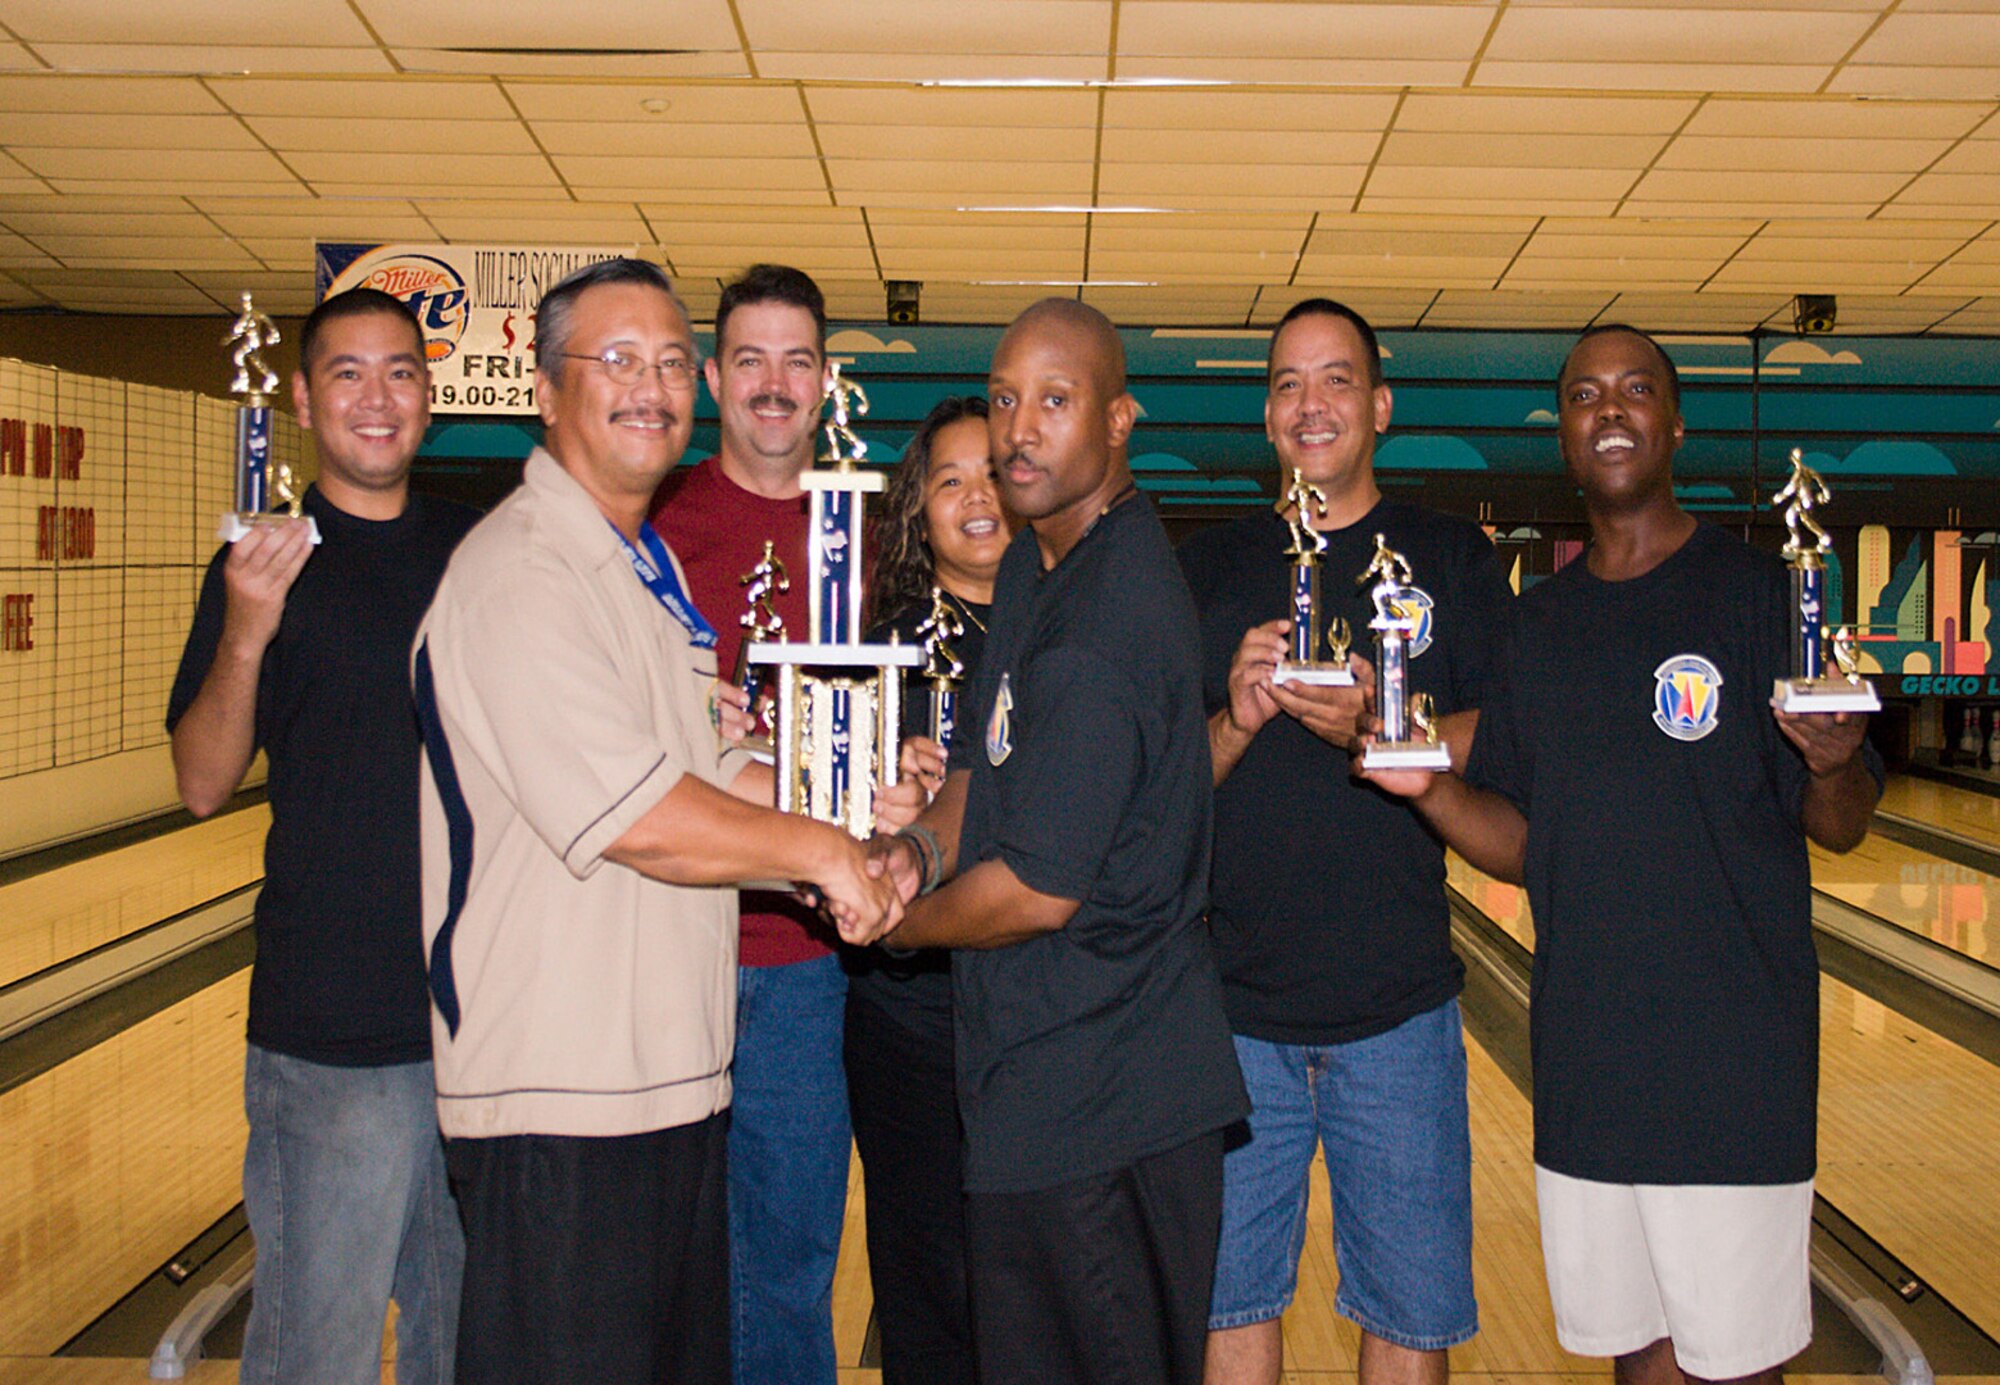 The 36th Civil Engineer Squadron intramural bowling team displays their trophy after winning the base intramural championships.